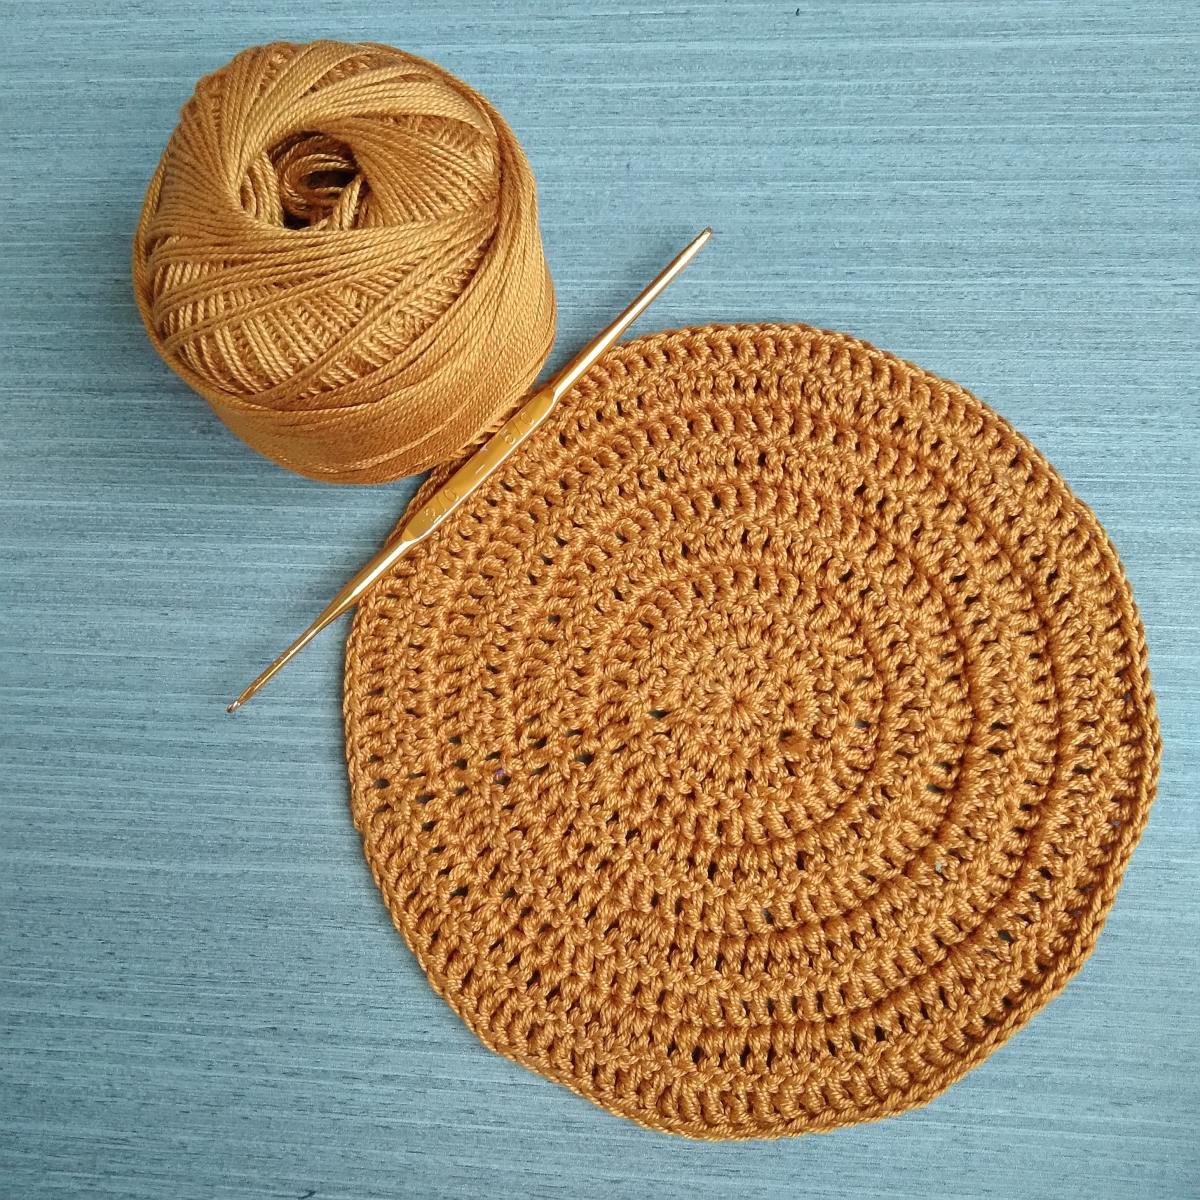 The History of Crochet in America